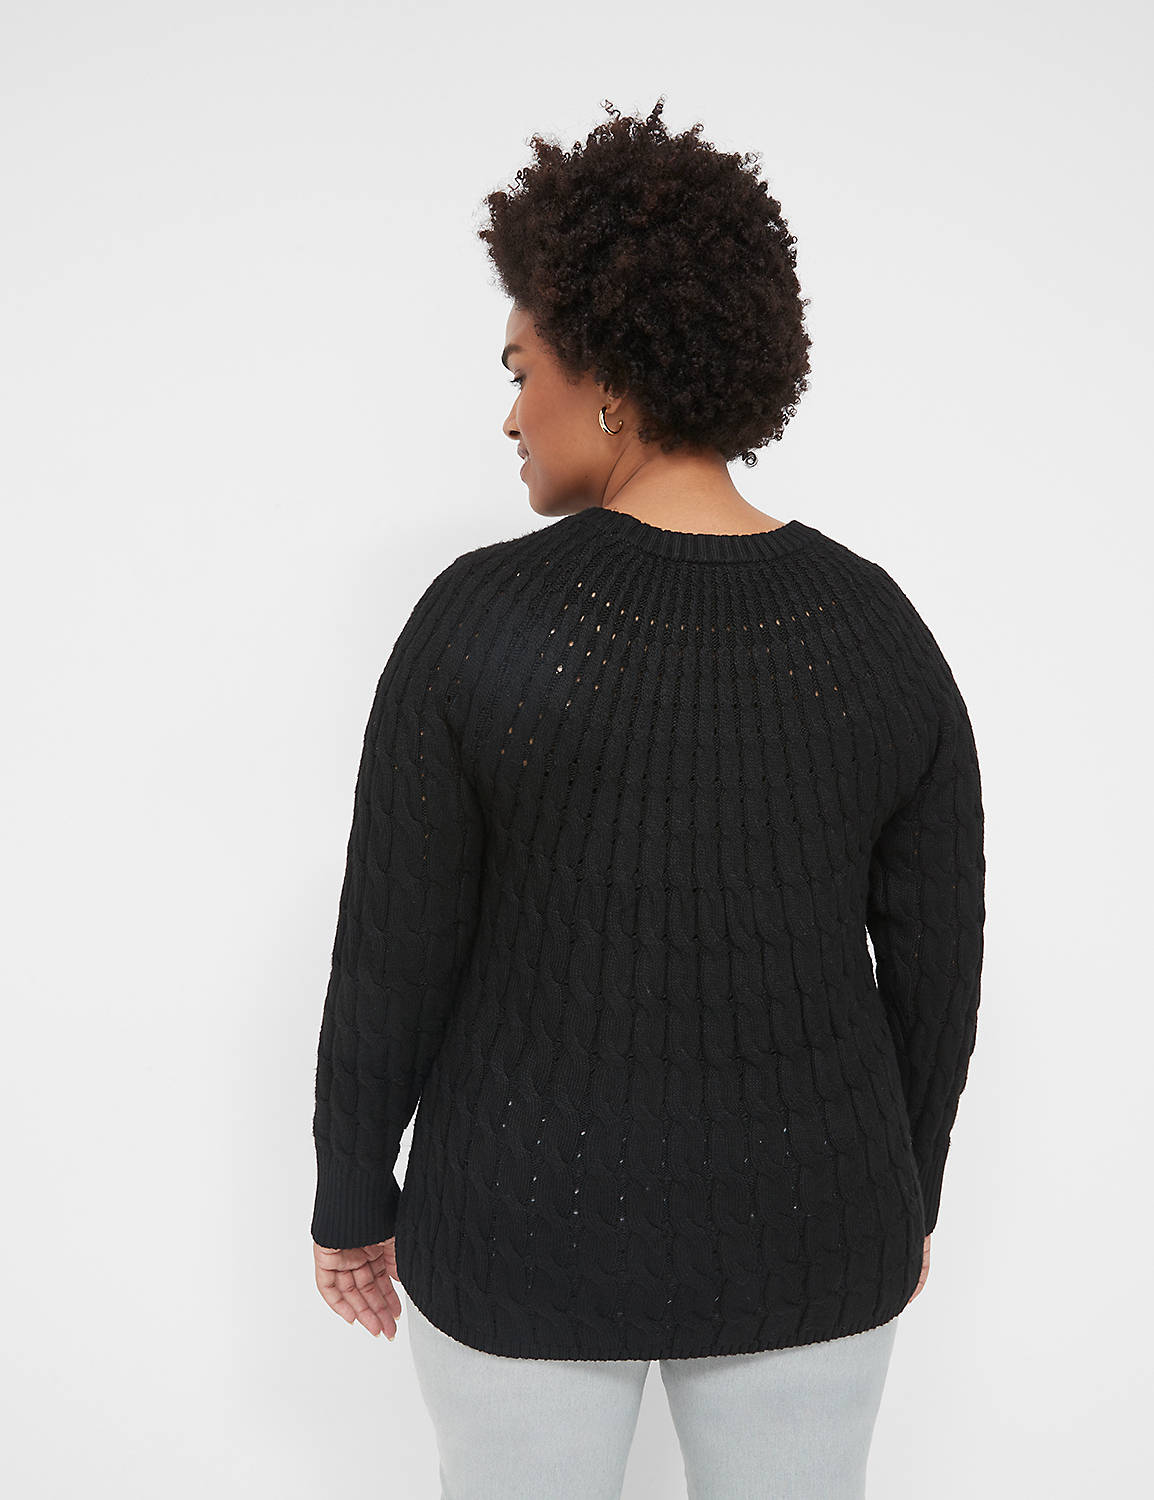 Classic Long Sleeve Round Neck Cabl Product Image 2